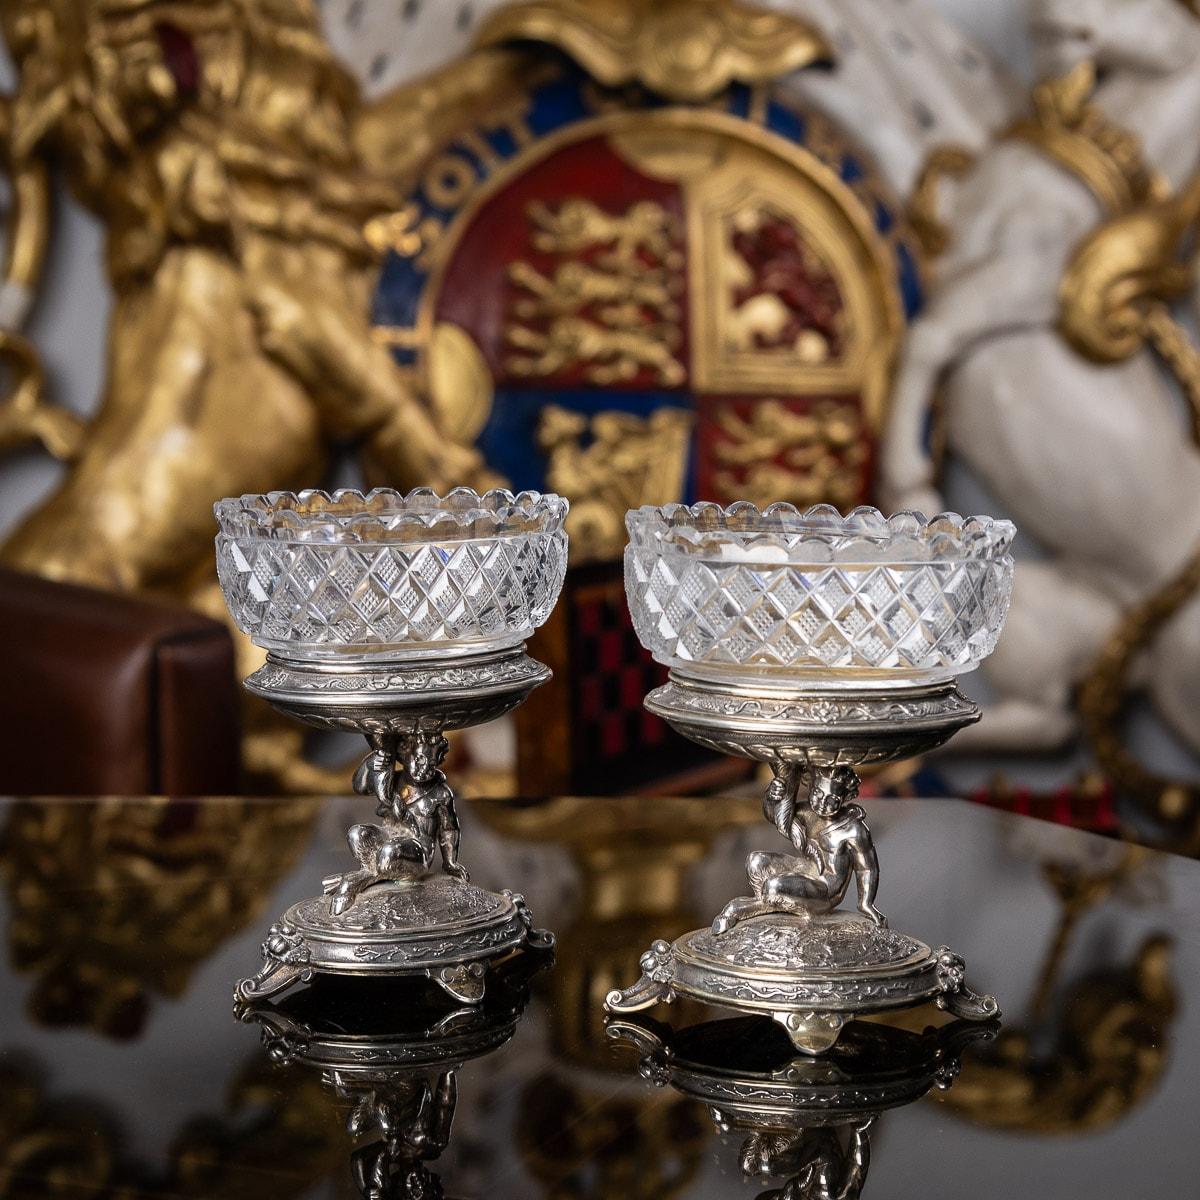 19th century Victorian pair of silver figural salts, each piece raised on an oval domed base on four scrolling feet, each stunning figural stems modelled like a faun holding a cornucopia, with an oval bowl mounted with cut glass.
Hallmarked English